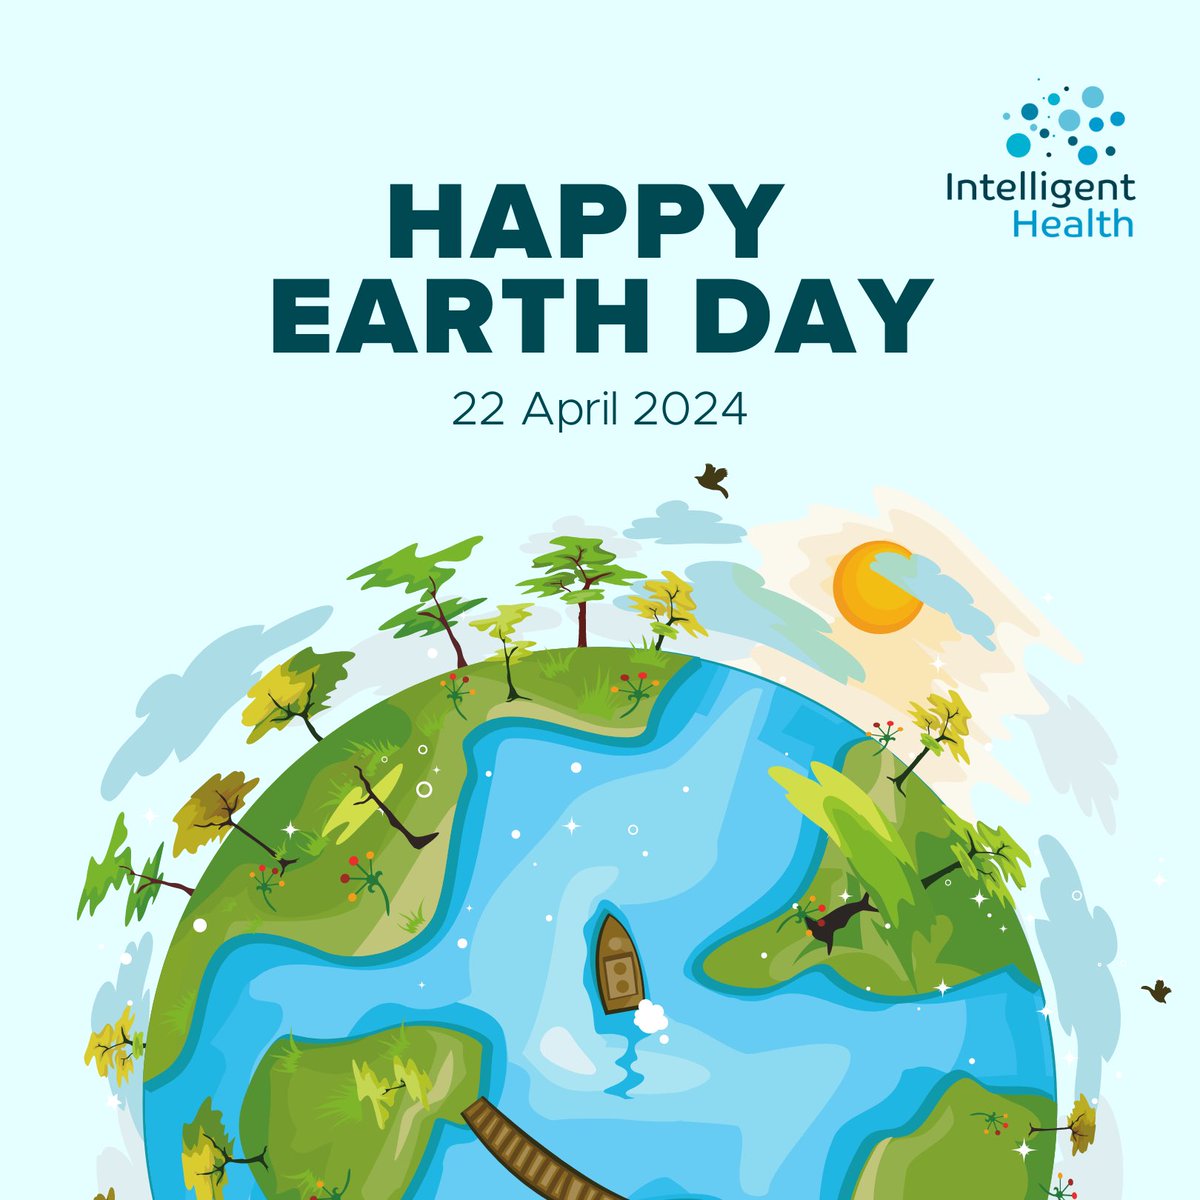 🌎🌿 Happy Earth Day! 🌿🌎 As we continue to celebrate Earth Day and raise awareness about the importance of preserving our planet, let’s also remember to cherish and protect the green spaces that provide us with so many benefits. 🌿💚 #EarthDay #GreenSpaces #HealthandWellbeing